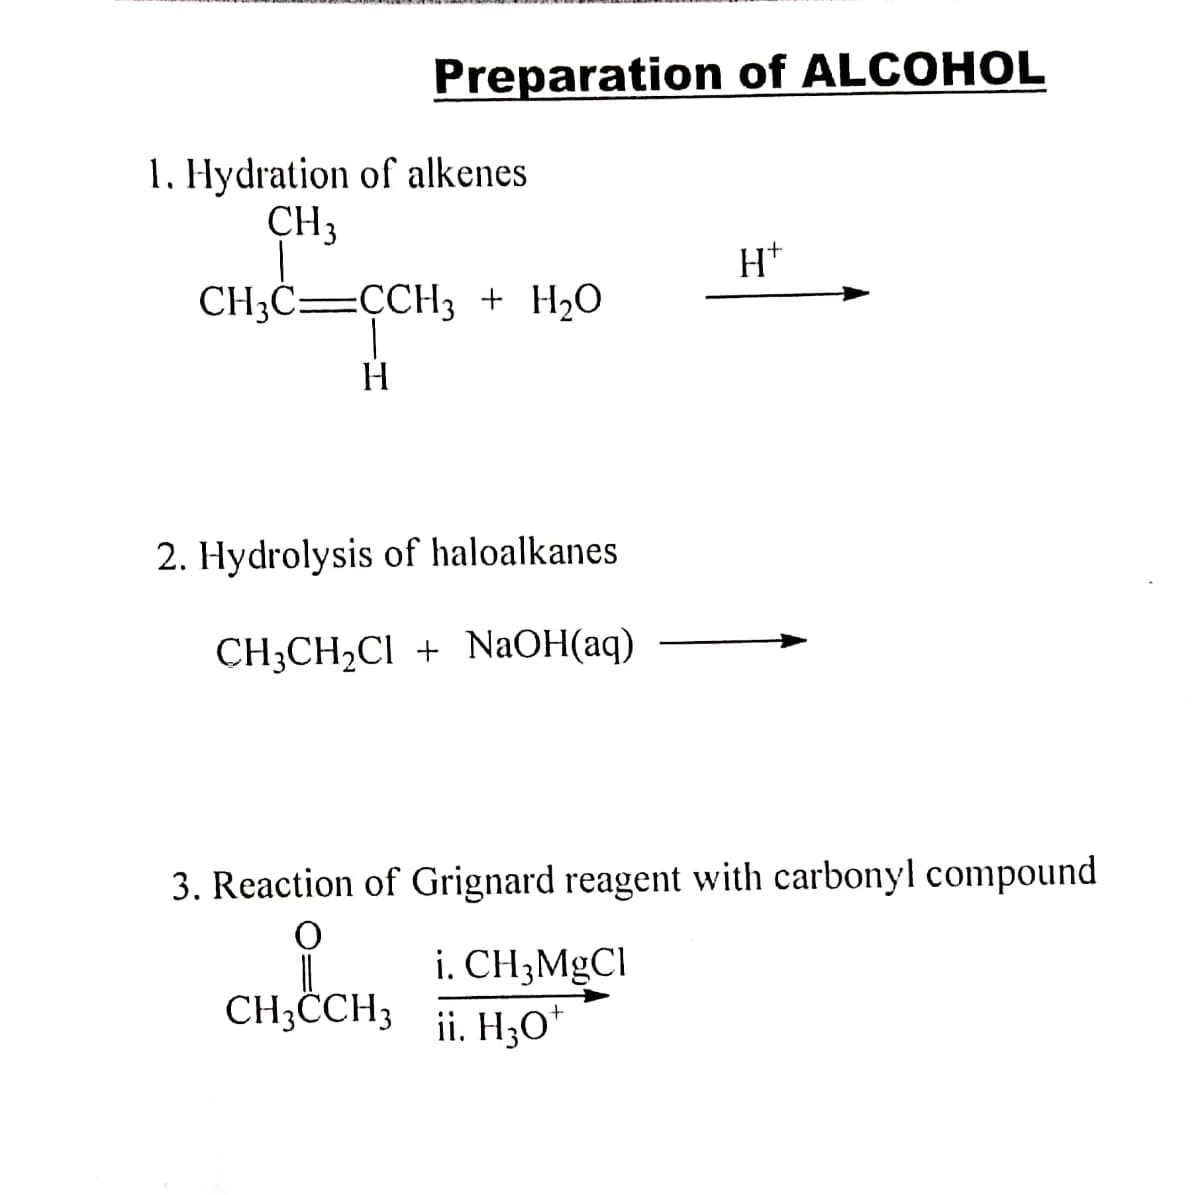 Preparation of ALCOHOL
1. Hydration of alkenes
CH3
H*
CH;C=CCH3 + H2O
H
2. Hydrolysis of haloalkanes
CH3CH2CI + NaOH(aq)
3. Reaction of Grignard reagent with carbonyl compound
i. CH3MgCl
ii. H3O*
CH3ČCH3
